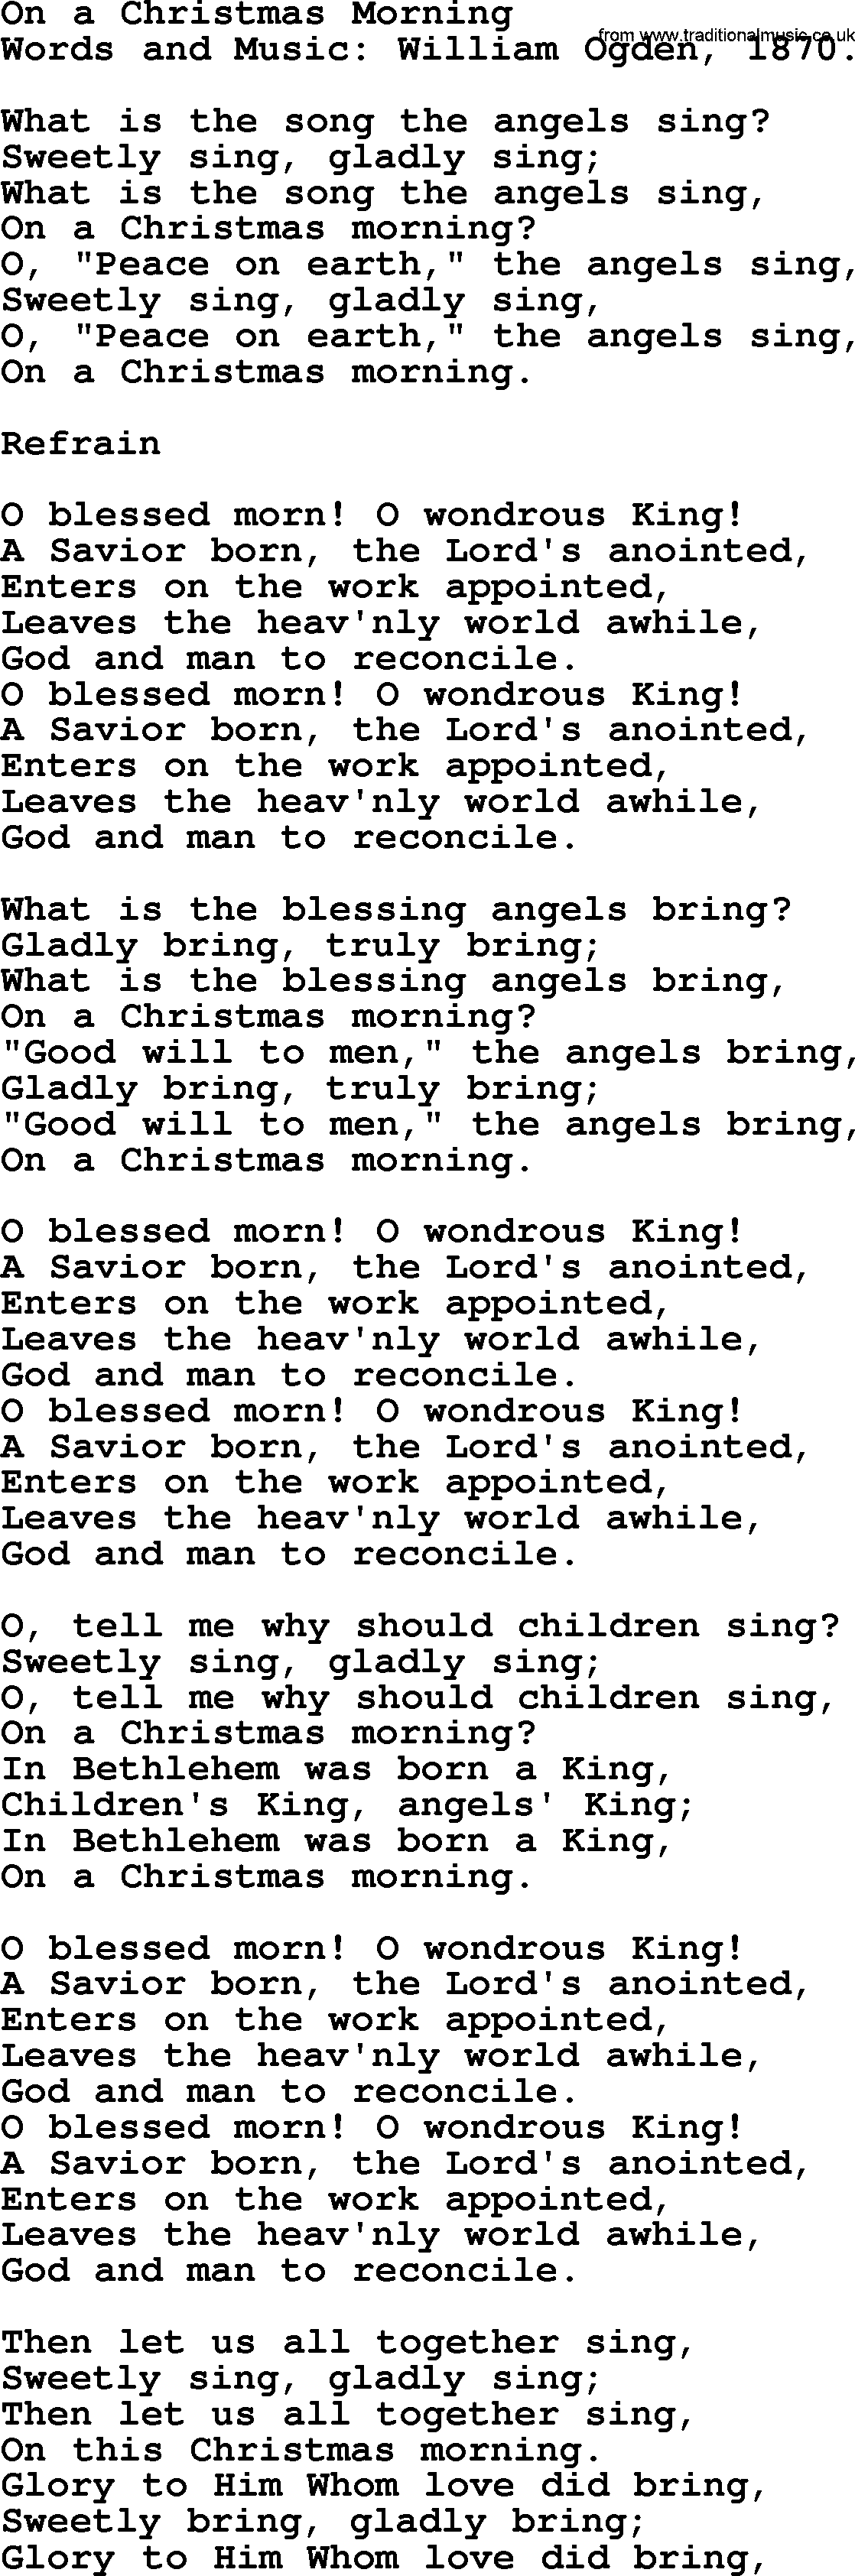 280 Christmas Hymns and songs with PowerPoints and PDF, title: On A Christmas Morning, lyrics, PPT and PDF